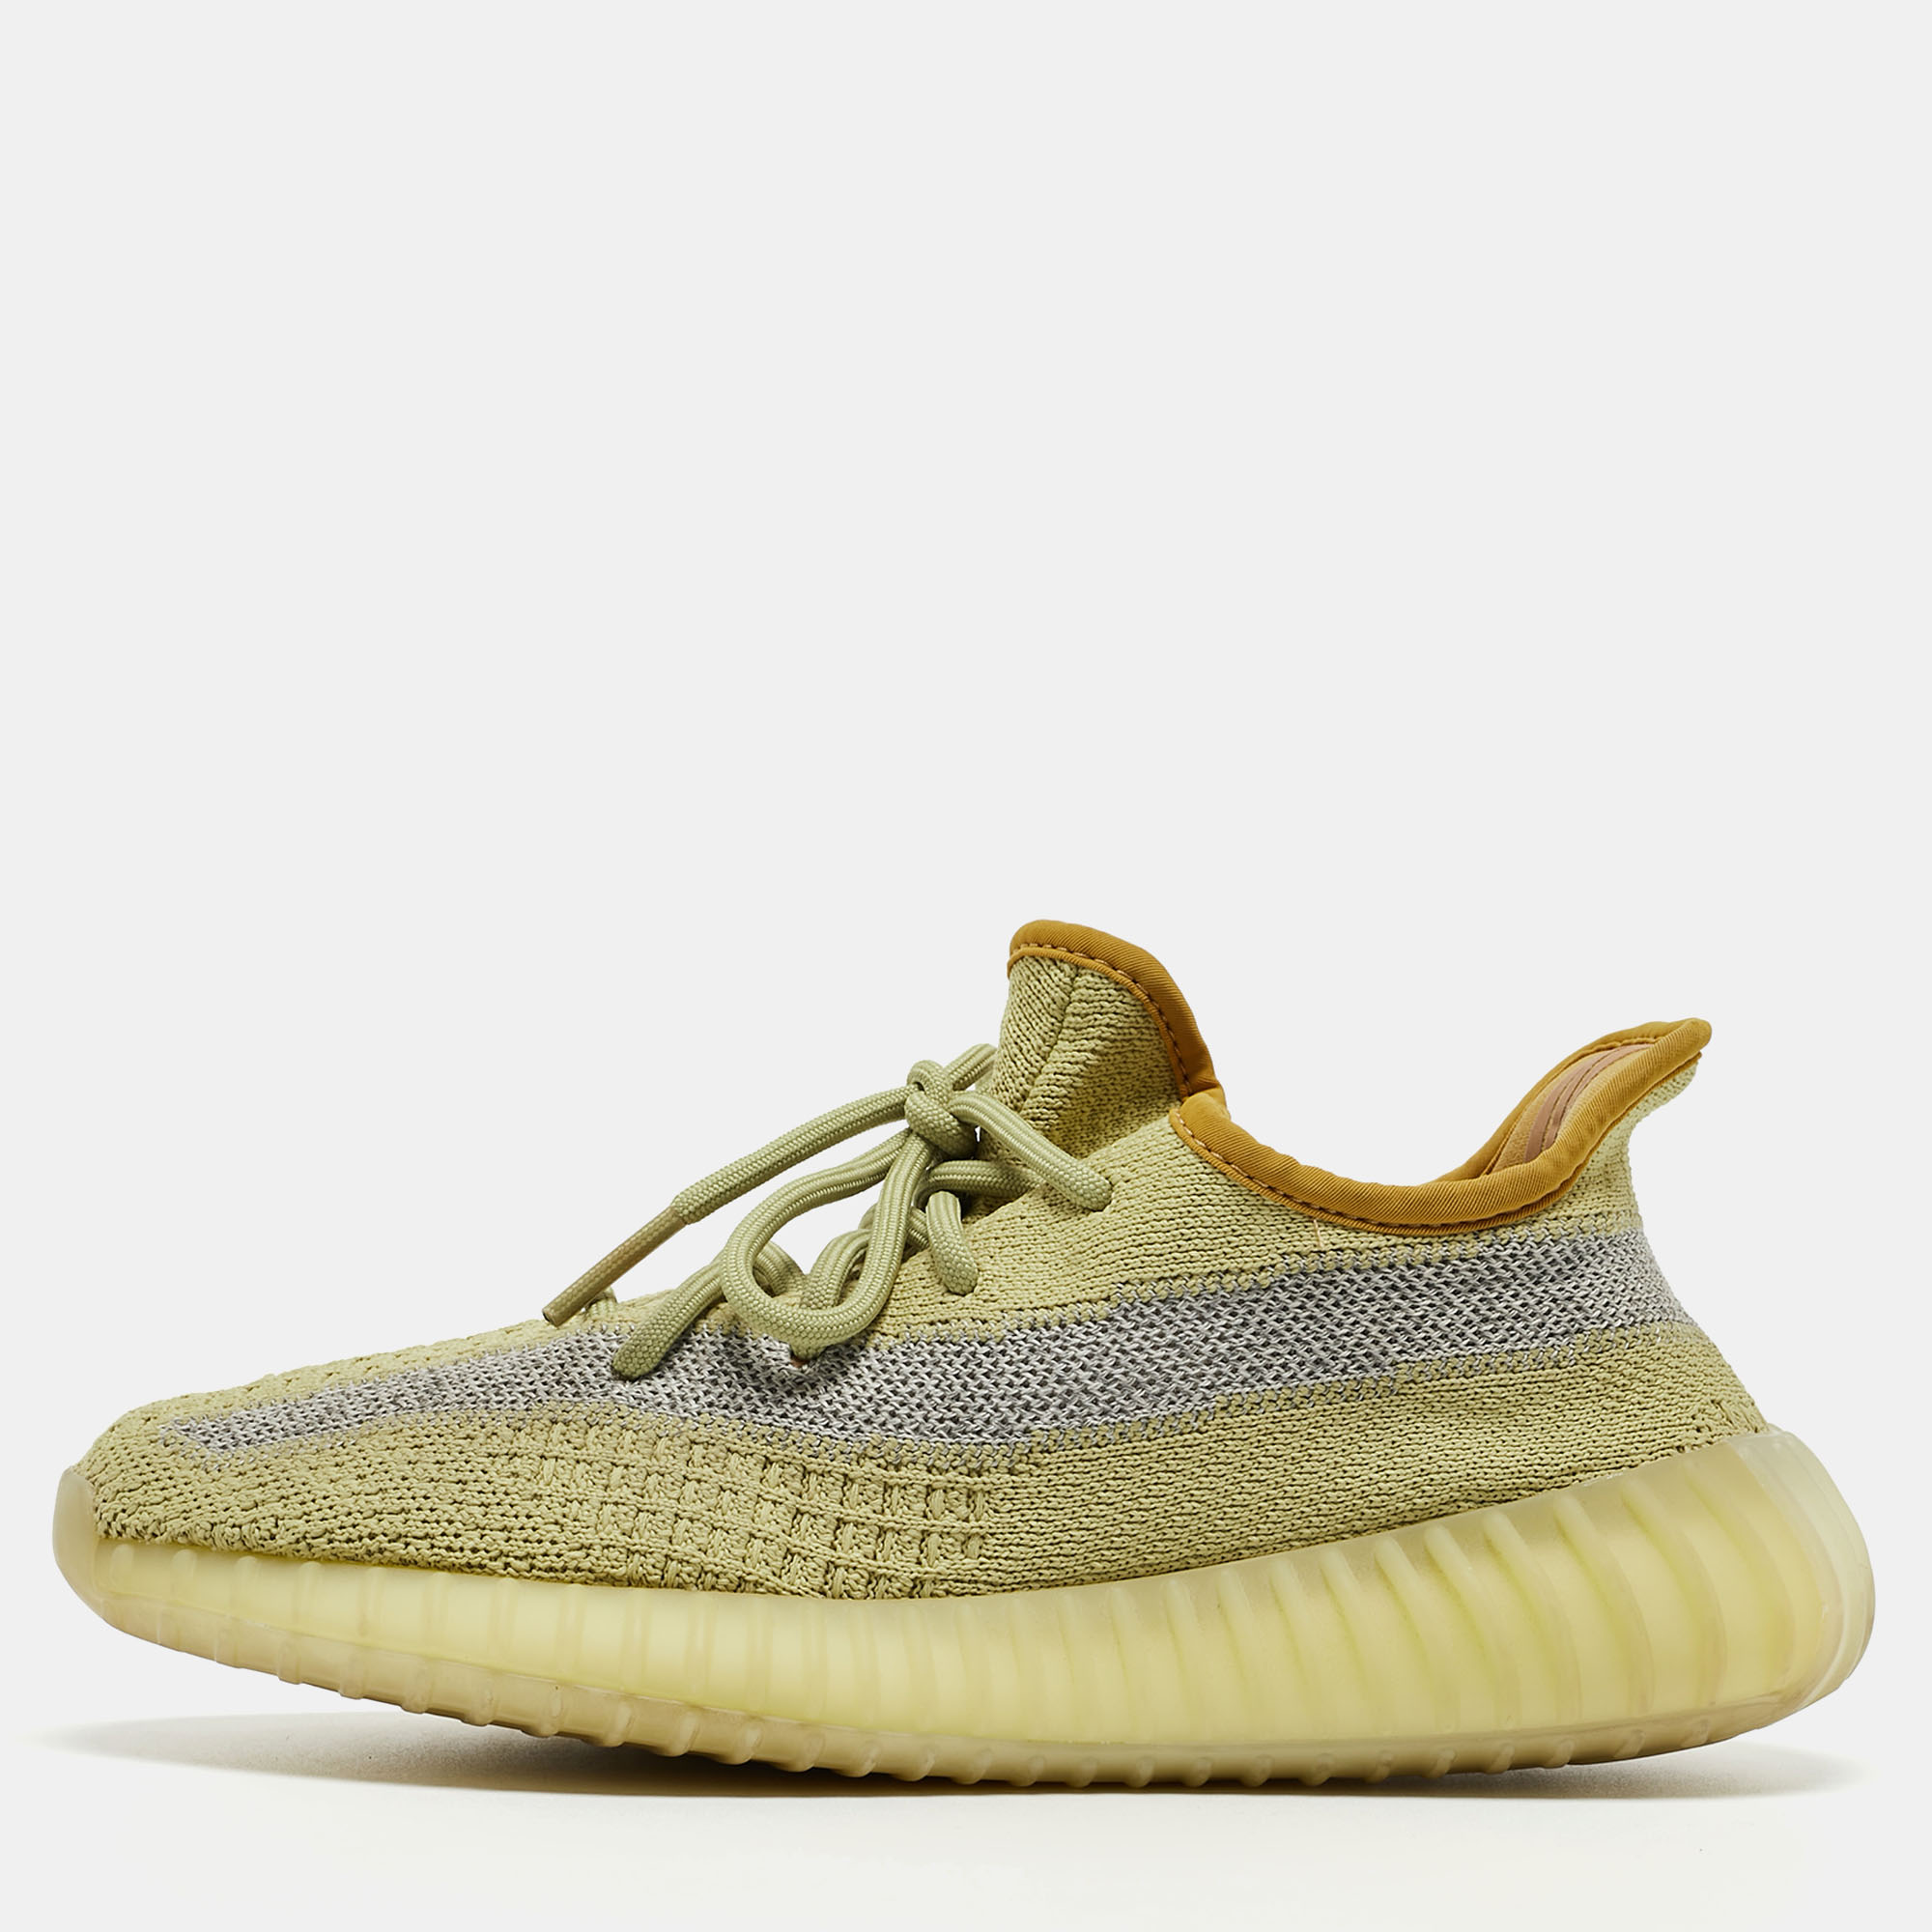 

Yeezy x Adidas Yellow Knit Fabric Boost 350 V2 Marsh Sneakers Size 38